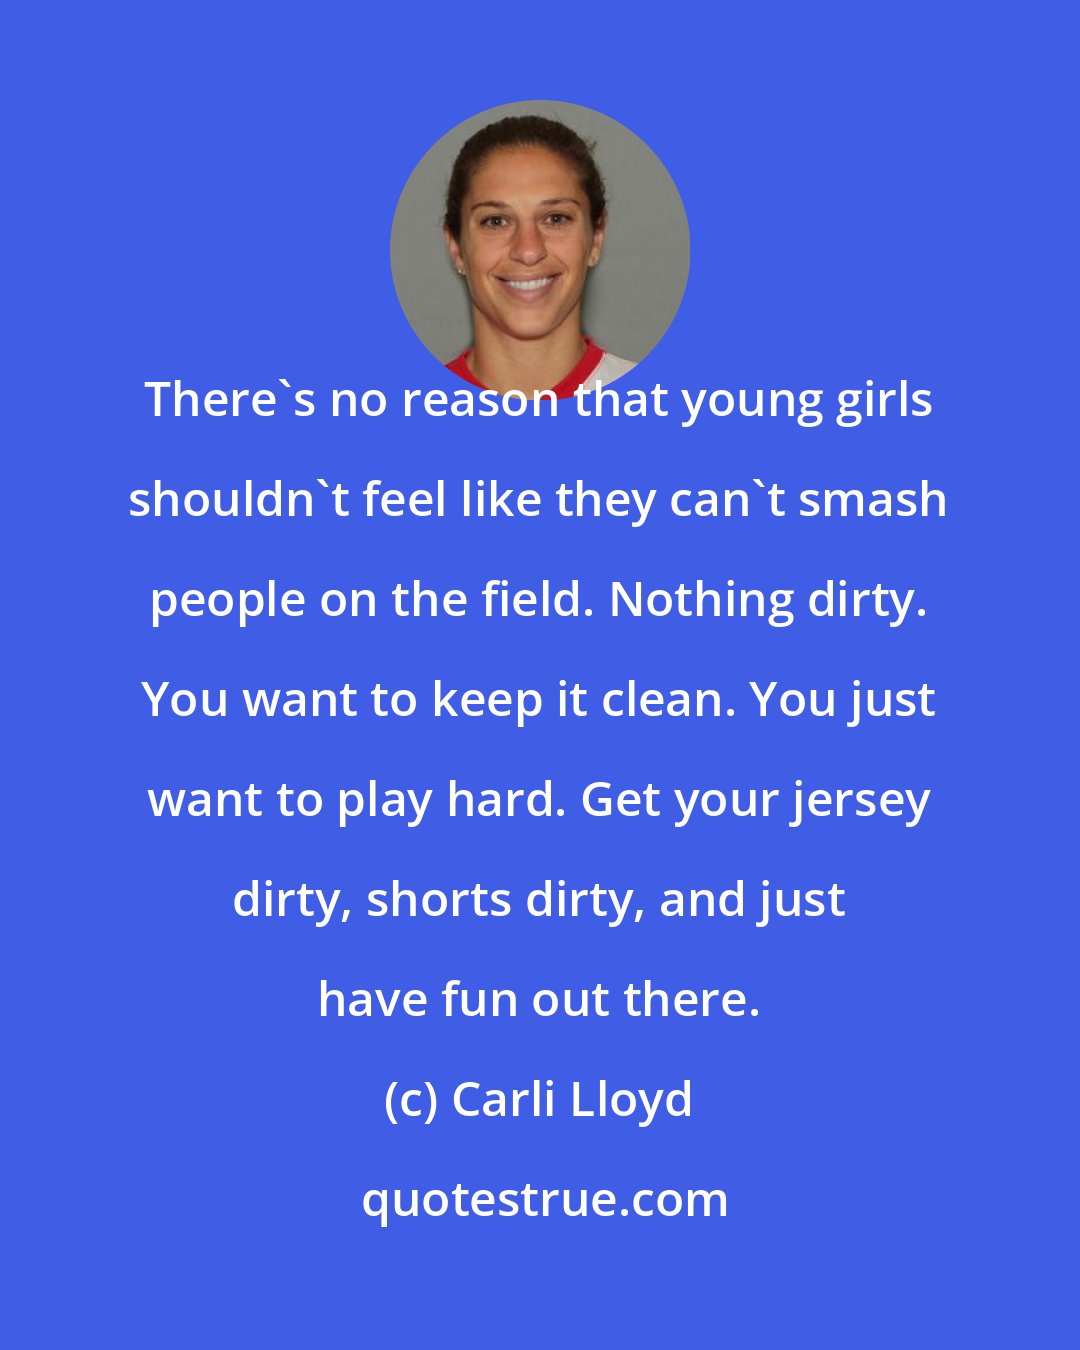 Carli Lloyd: There's no reason that young girls shouldn't feel like they can't smash people on the field. Nothing dirty. You want to keep it clean. You just want to play hard. Get your jersey dirty, shorts dirty, and just have fun out there.